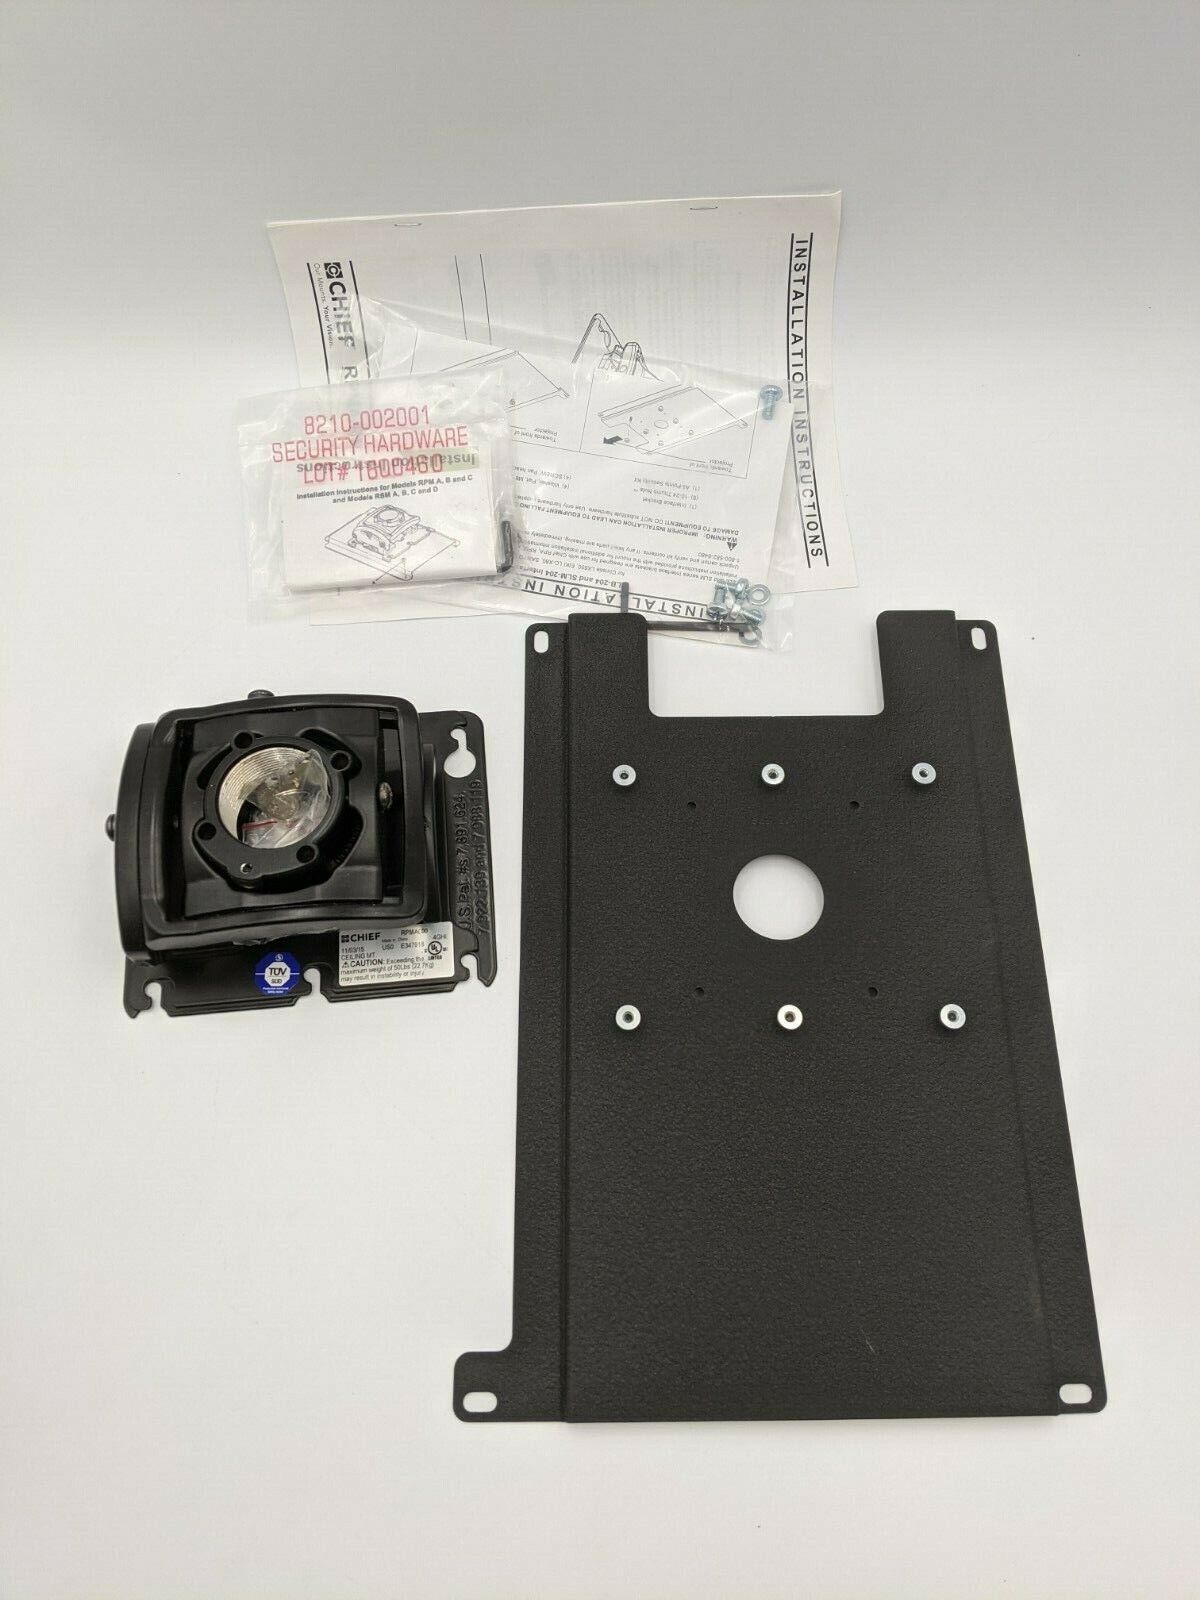 Chief RPMA204 Projector Ceiling Mount Kit Hardware Mounting Plate RPMA000 NOS